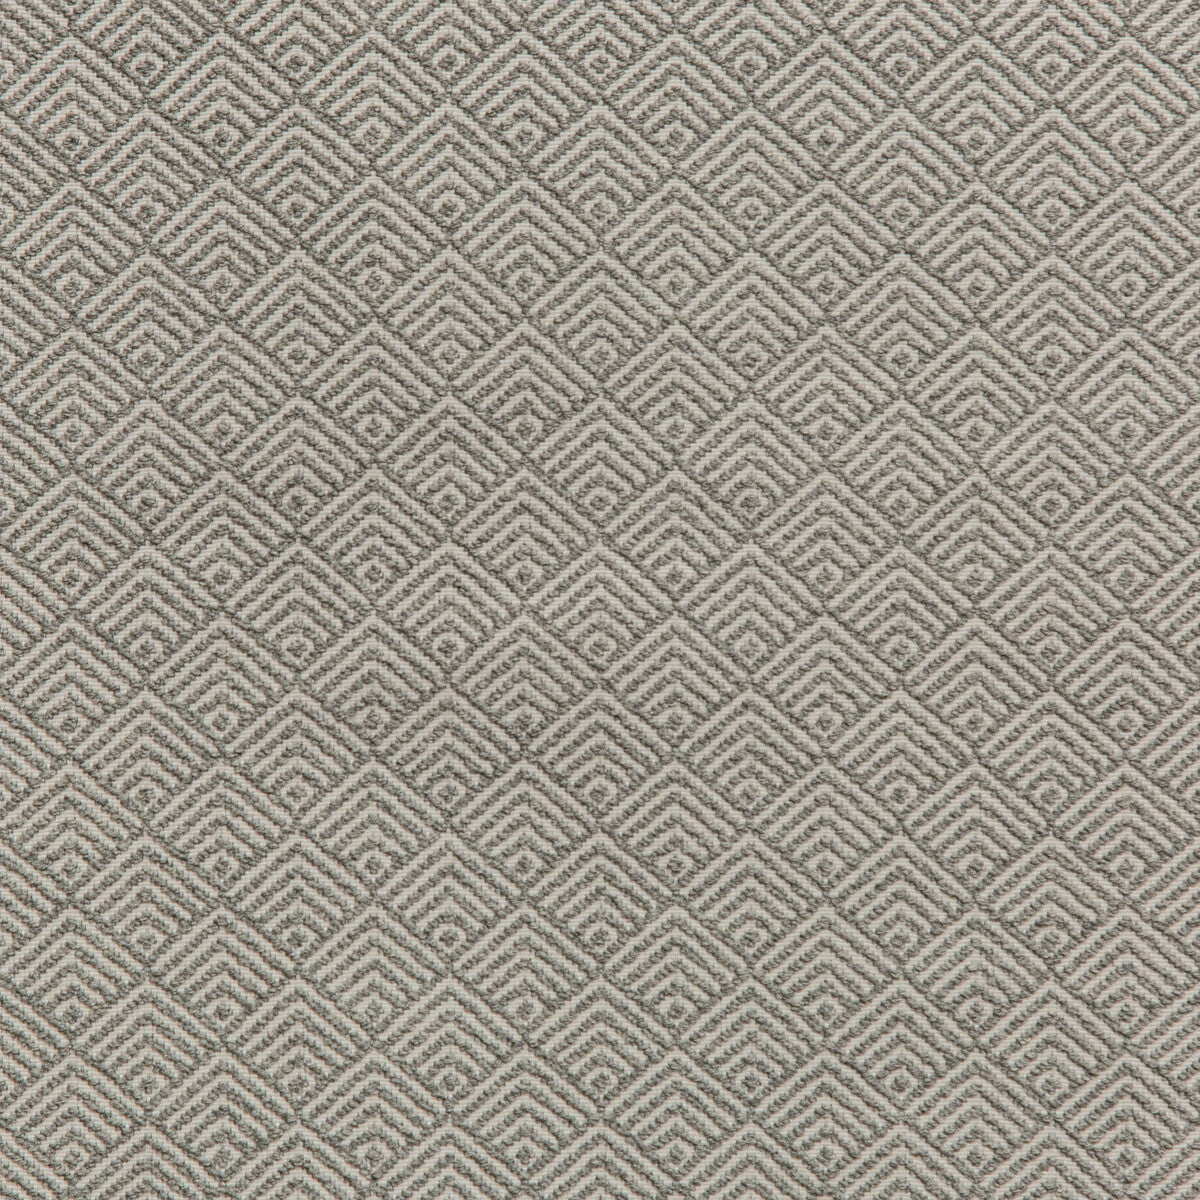 Bower fabric in stone color - pattern 35821.106.0 - by Kravet Design in the Indoor / Outdoor collection